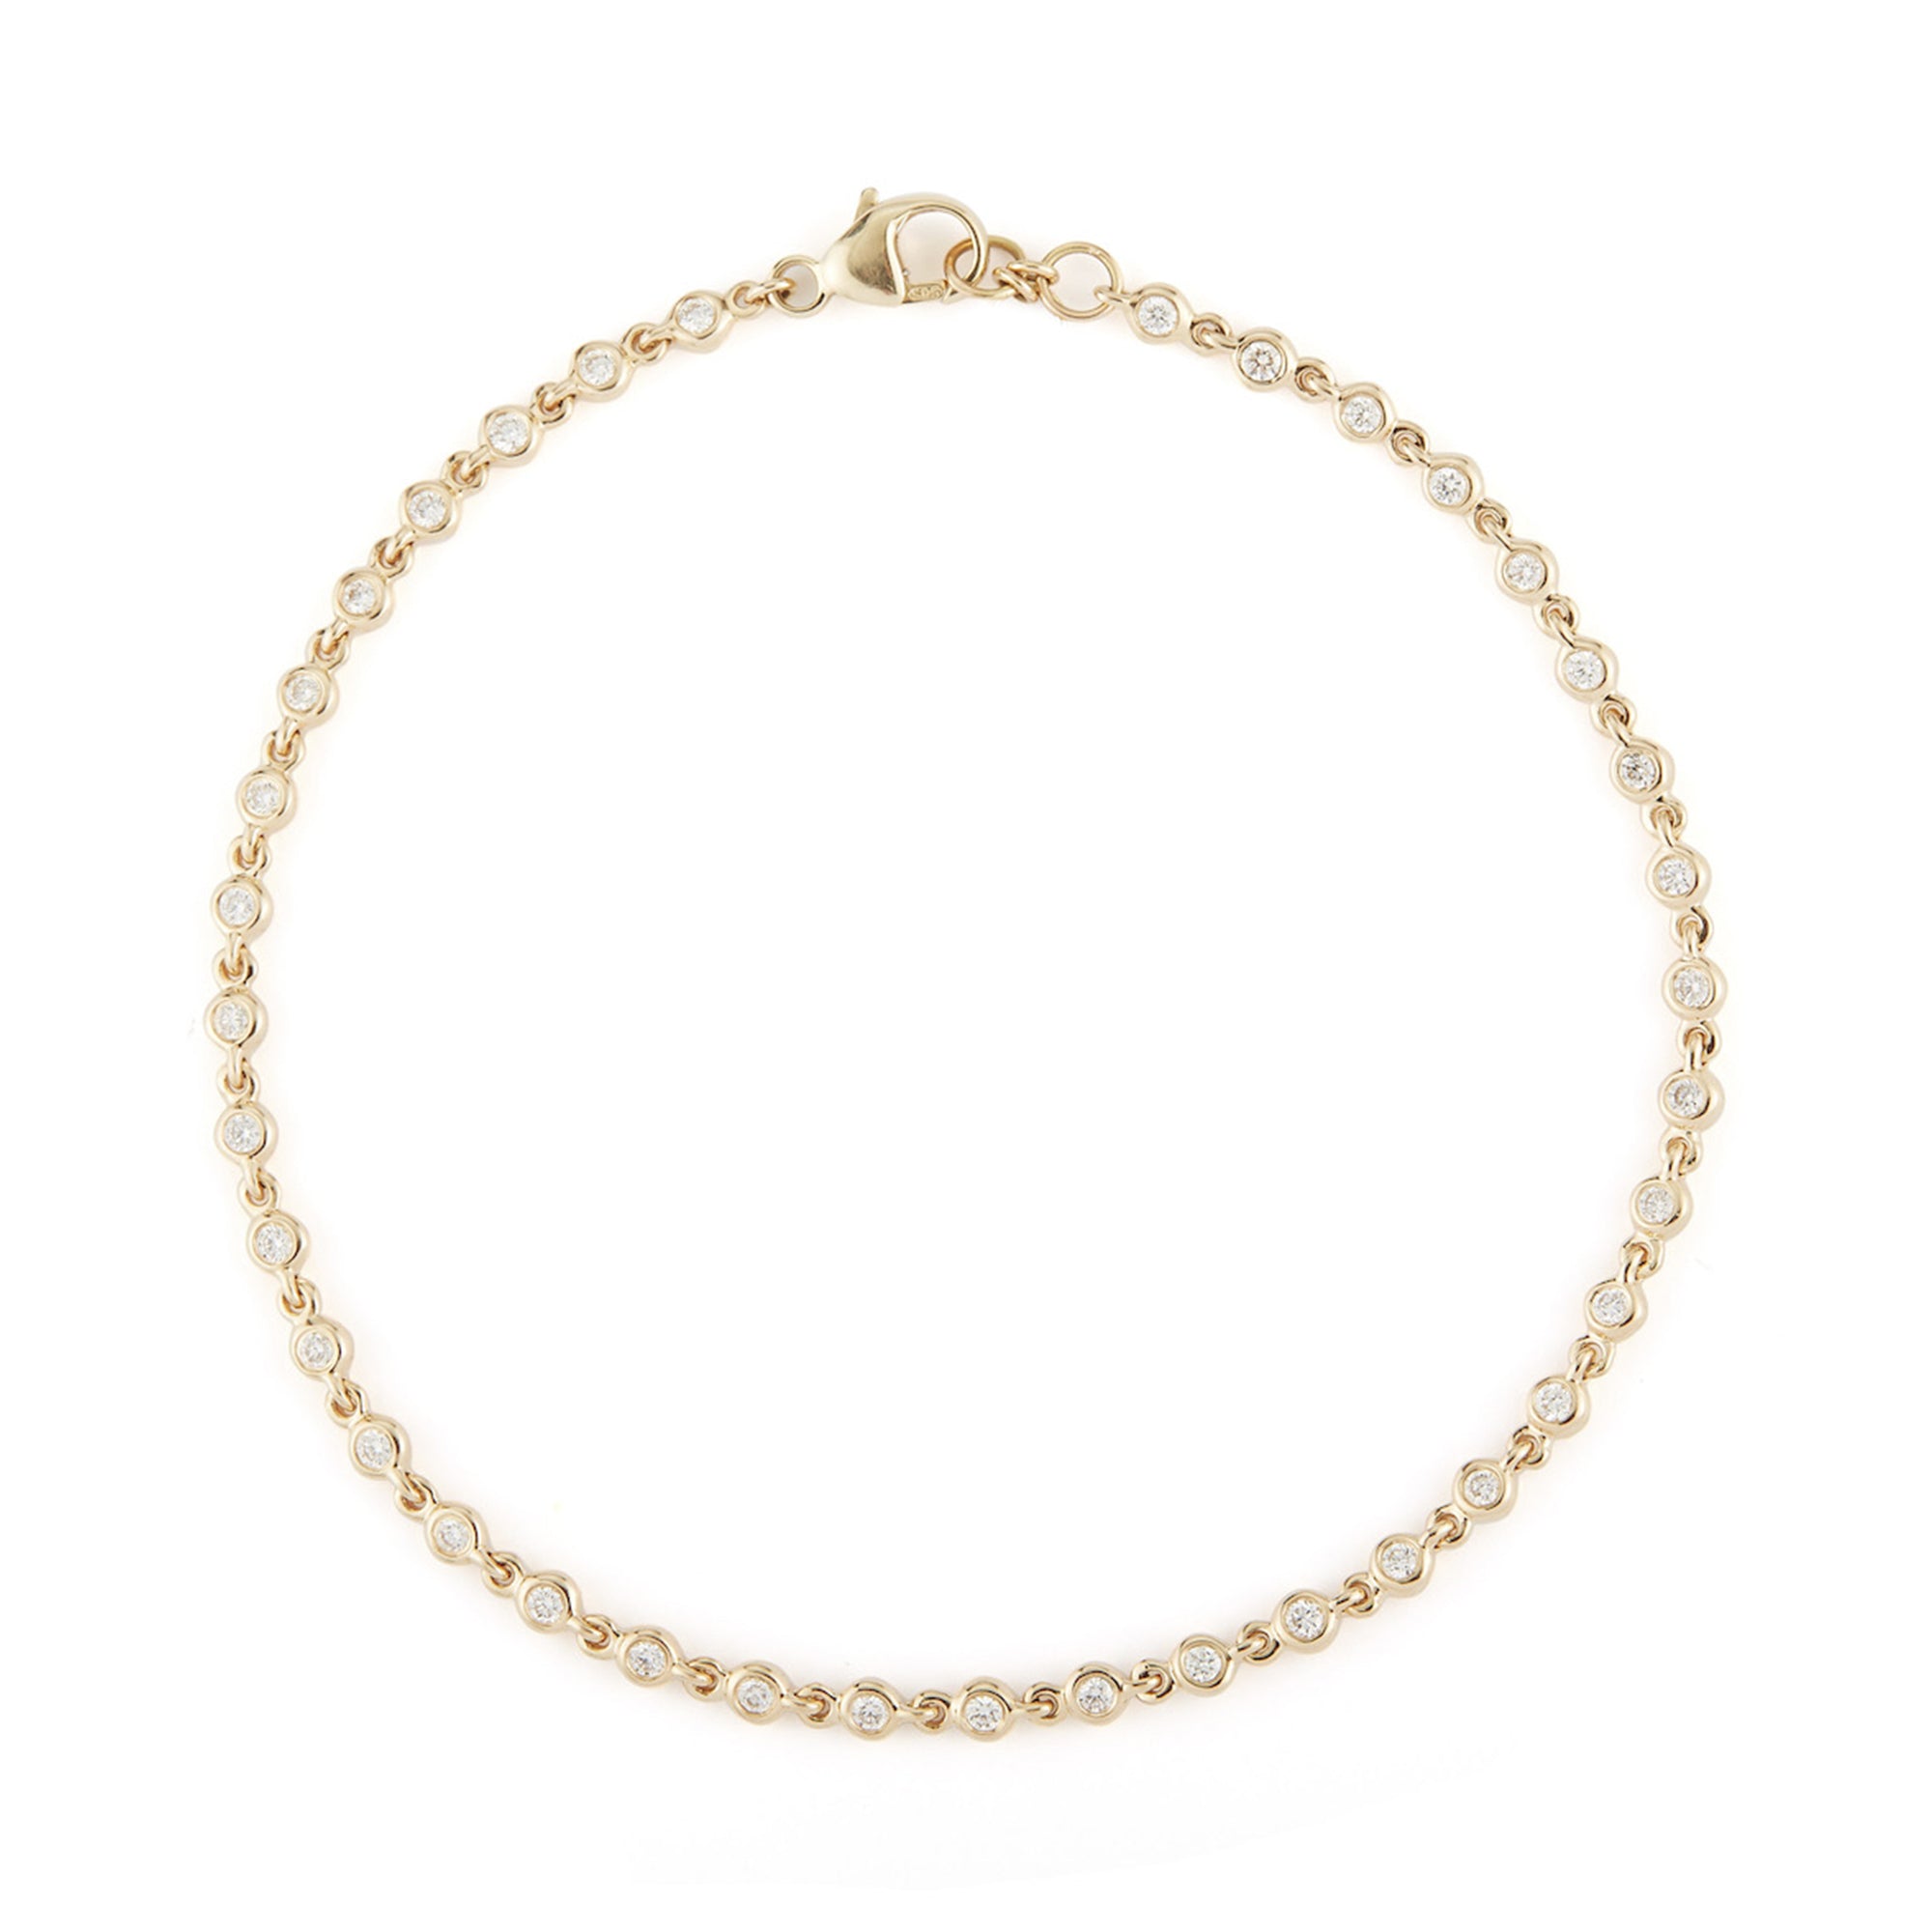 14K Gold Trio Diamond Bracelet with Thin Chain 14K Gold / 6.5 Inches